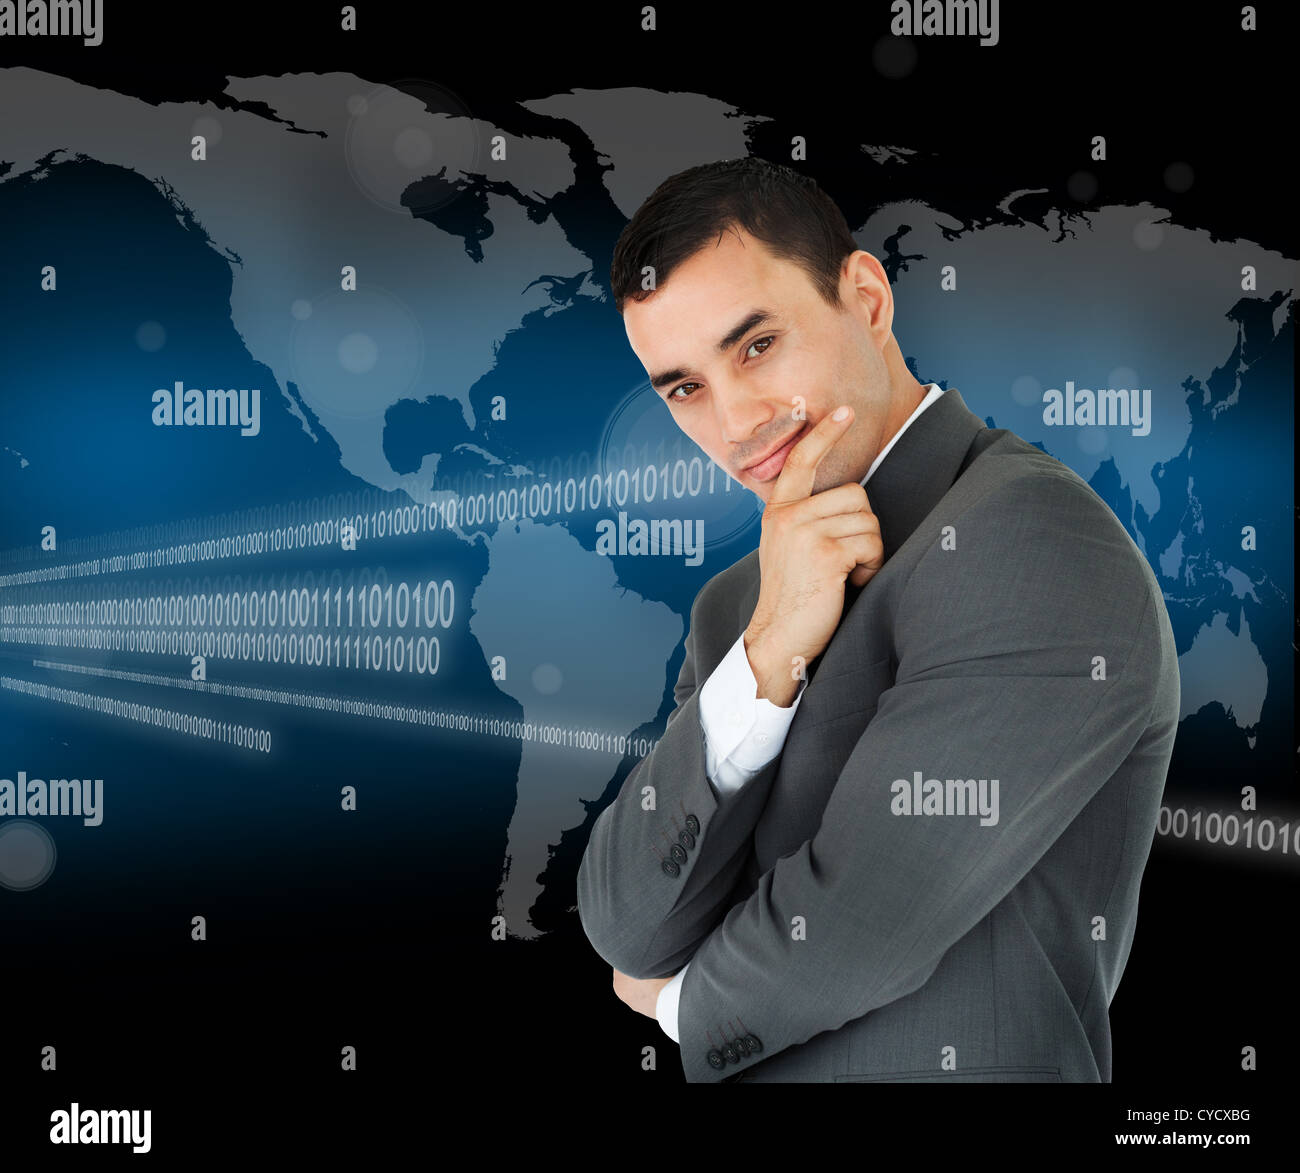 Businessman standing in front of world map Stock Photo